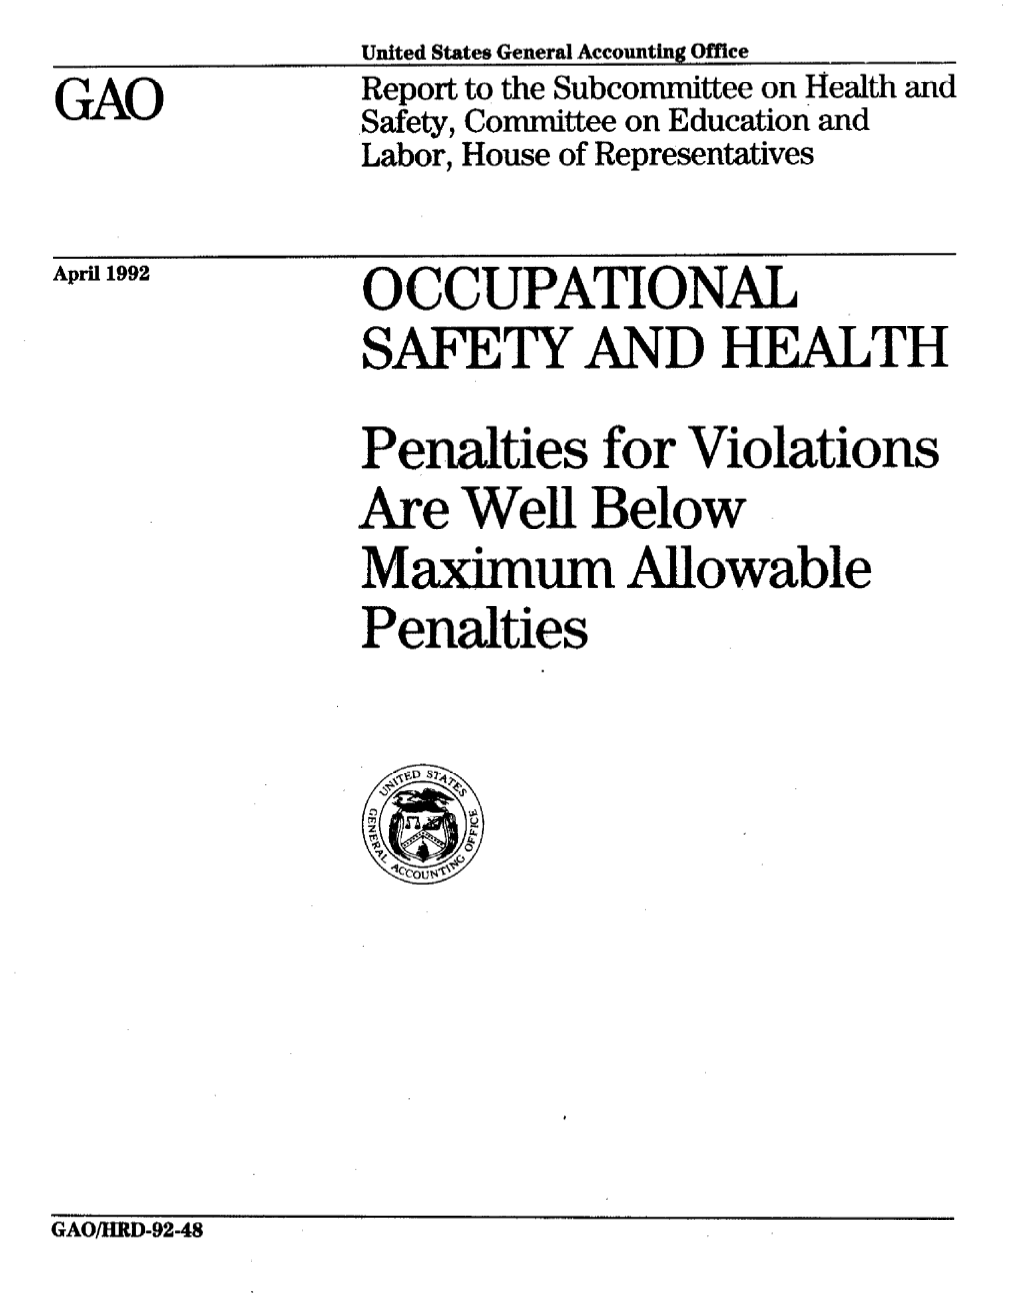 HRD-92-48 Occupational Safety and Health